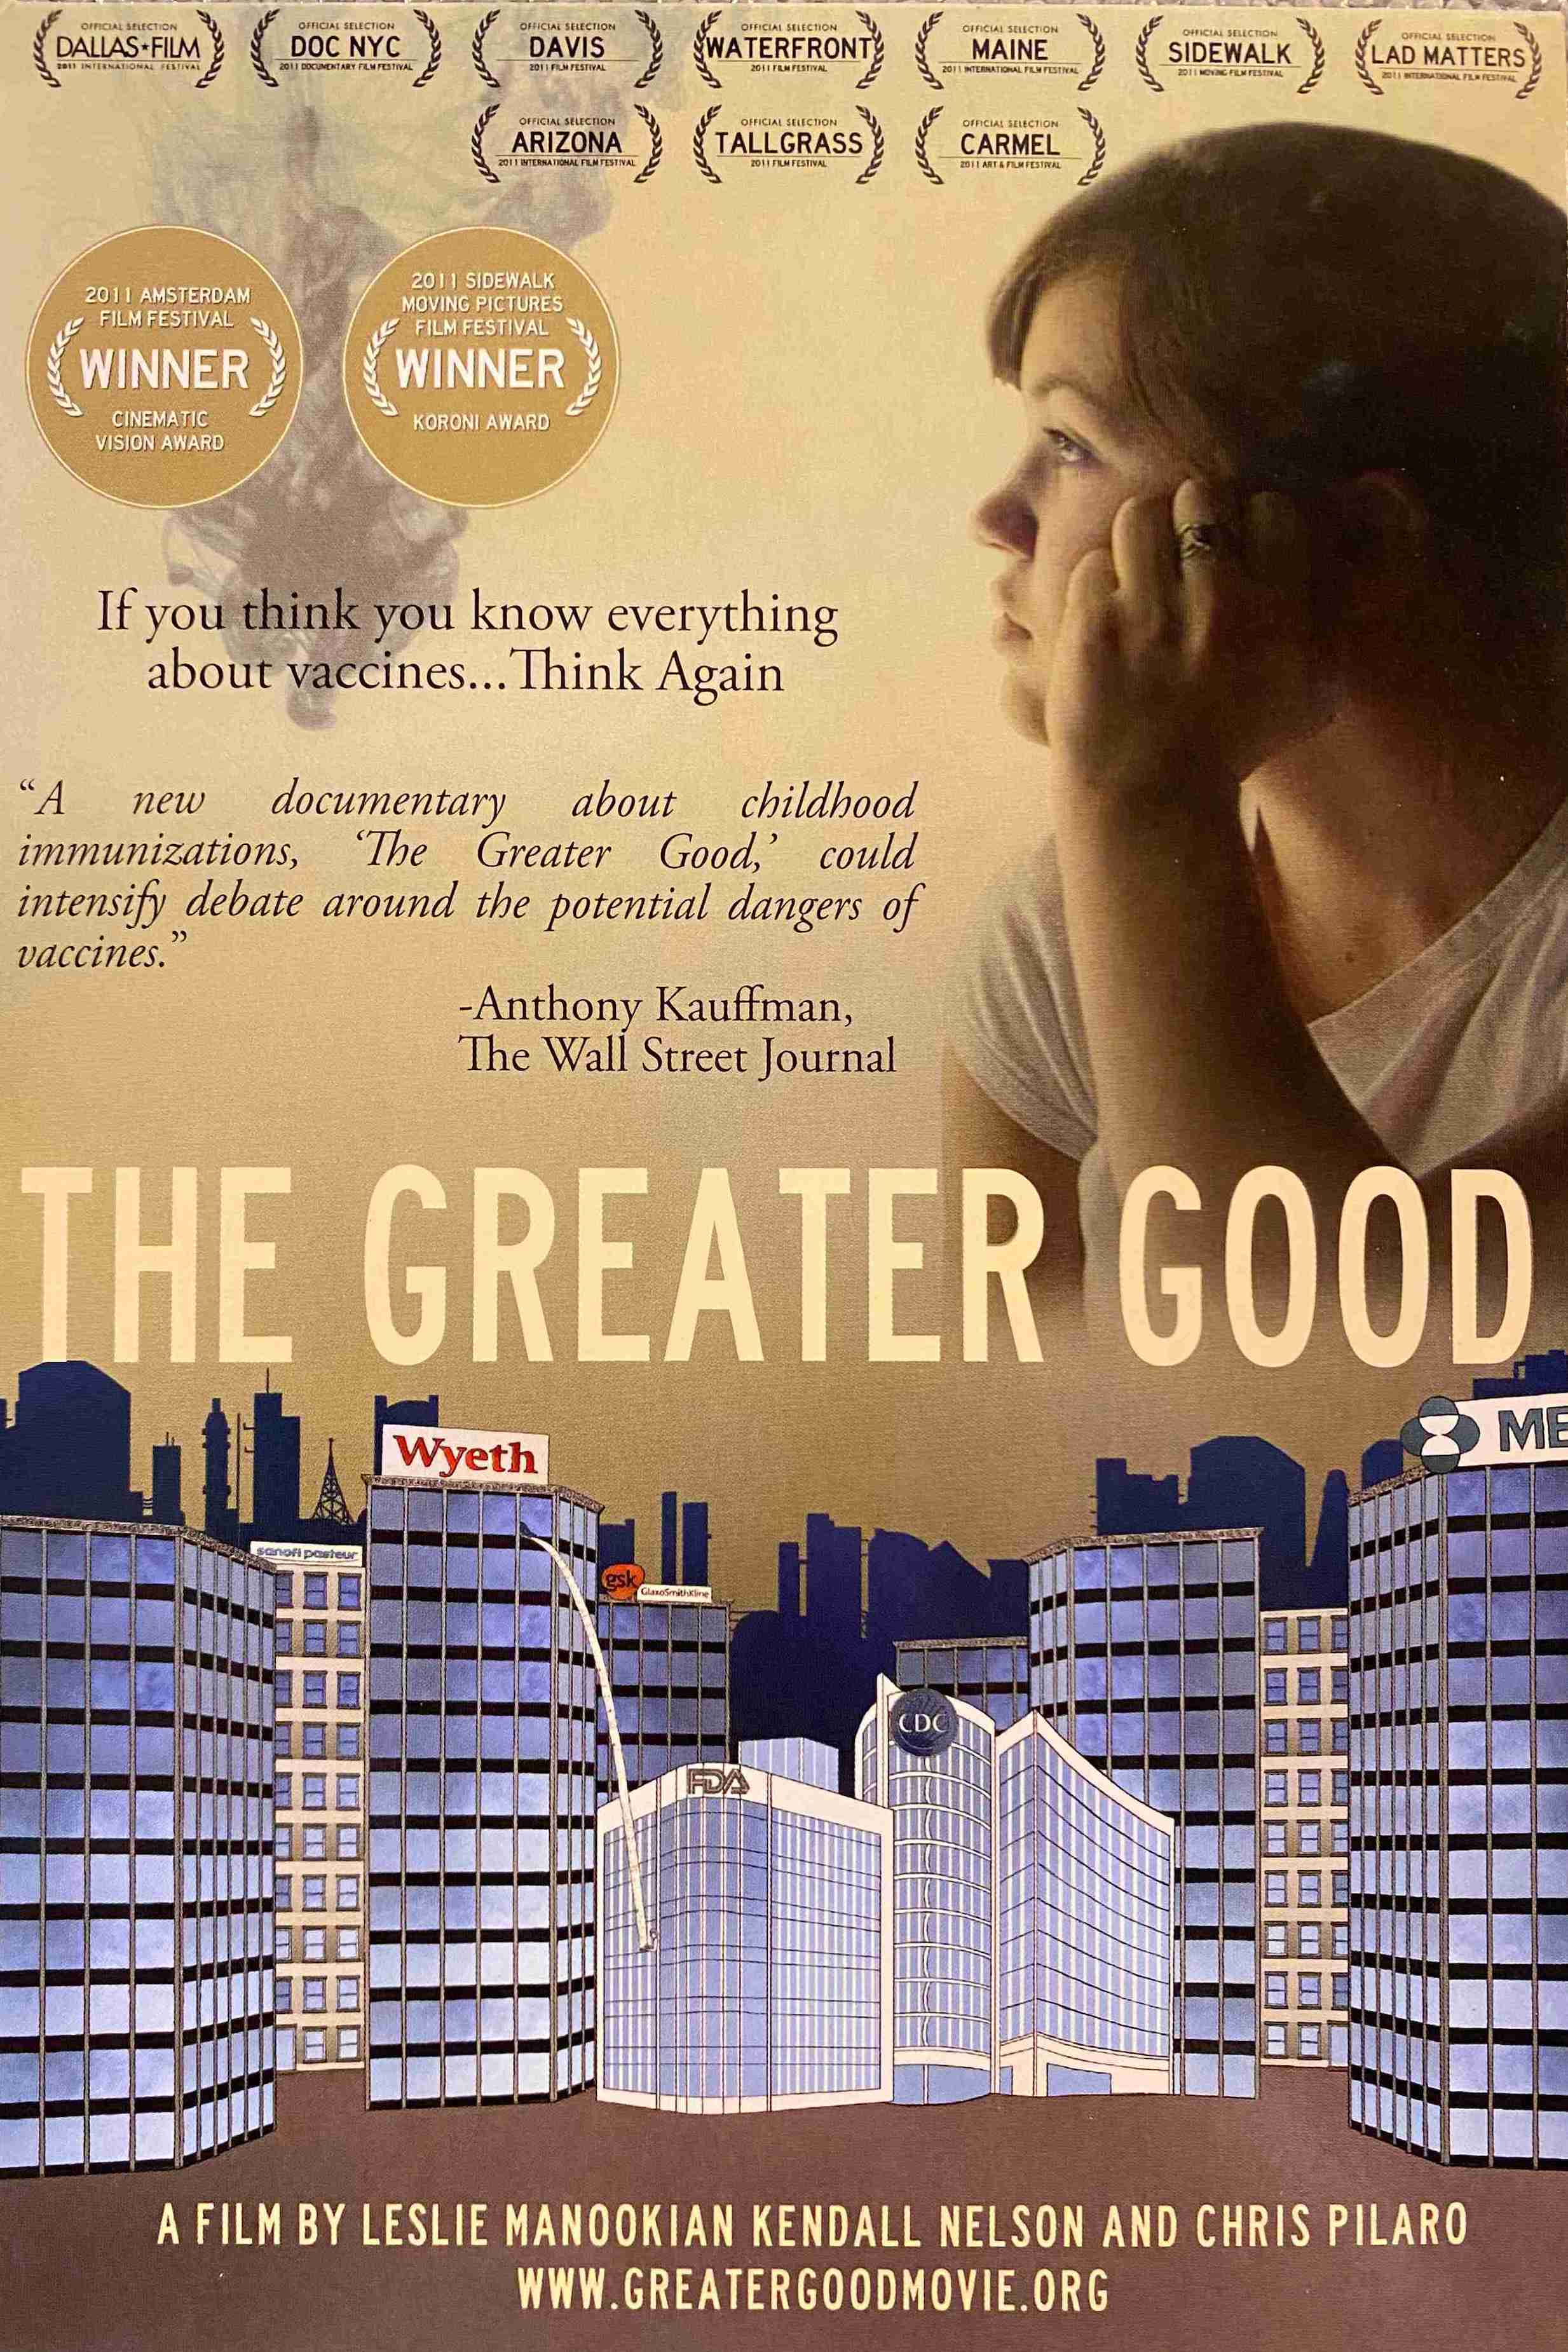 The Greater Good by Leslie Manookian and Kendall Nelson (Digital File)